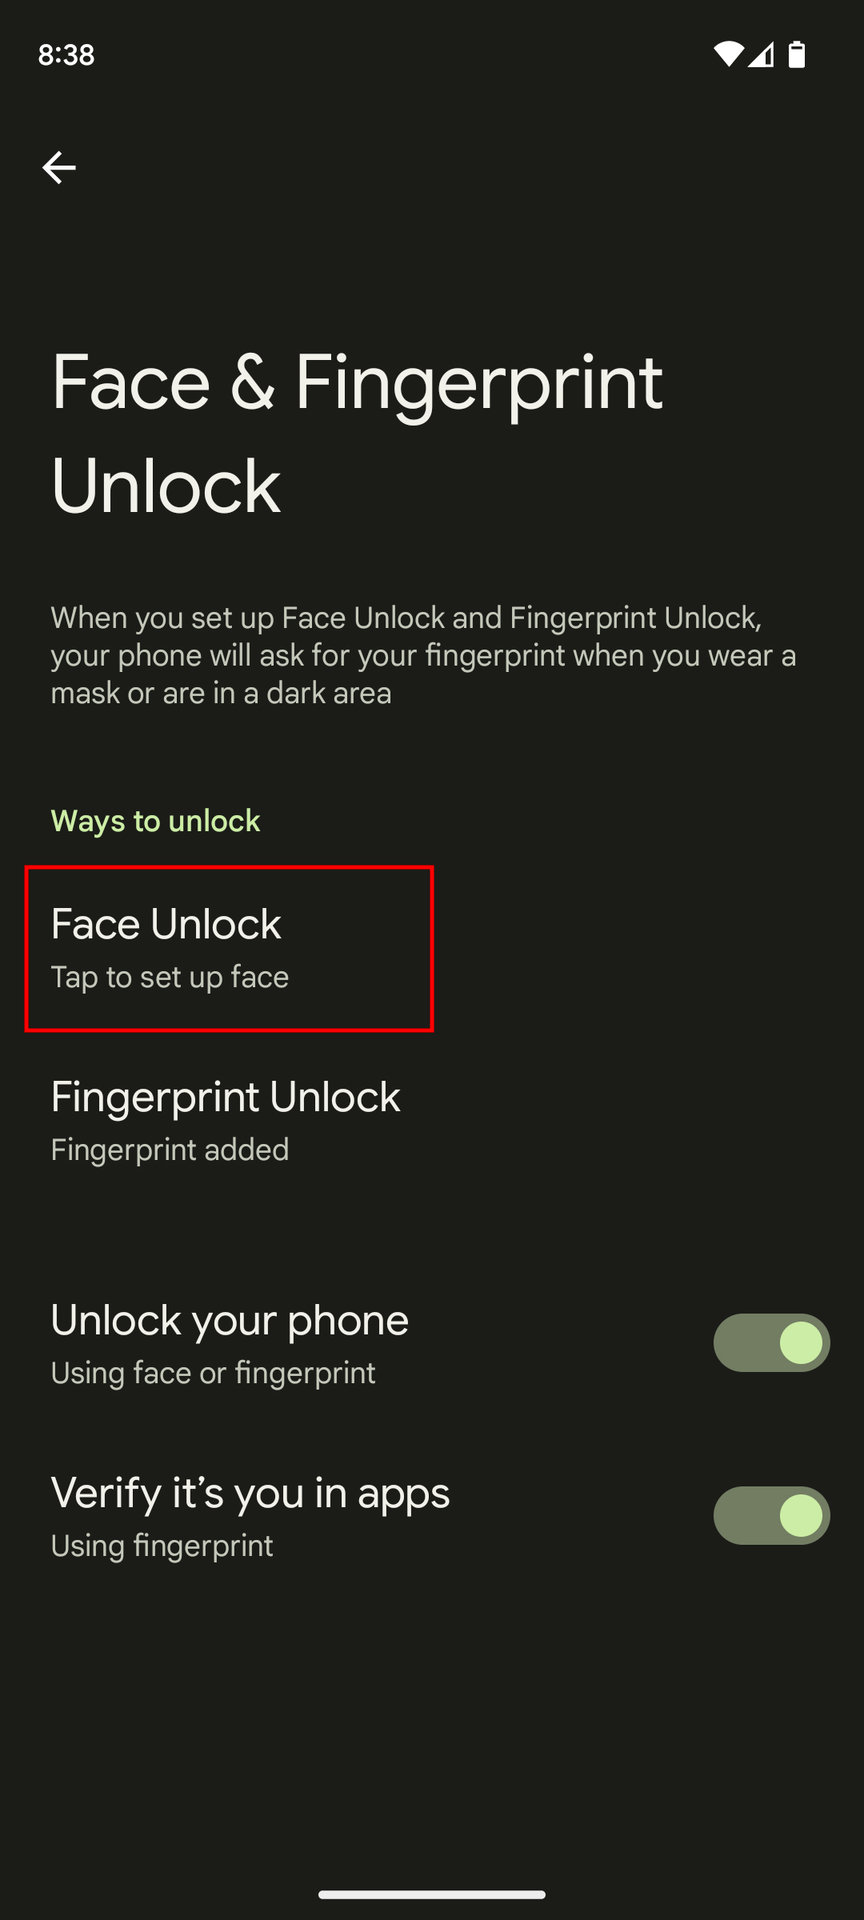 How to set up Face Unlock on Pixel 4